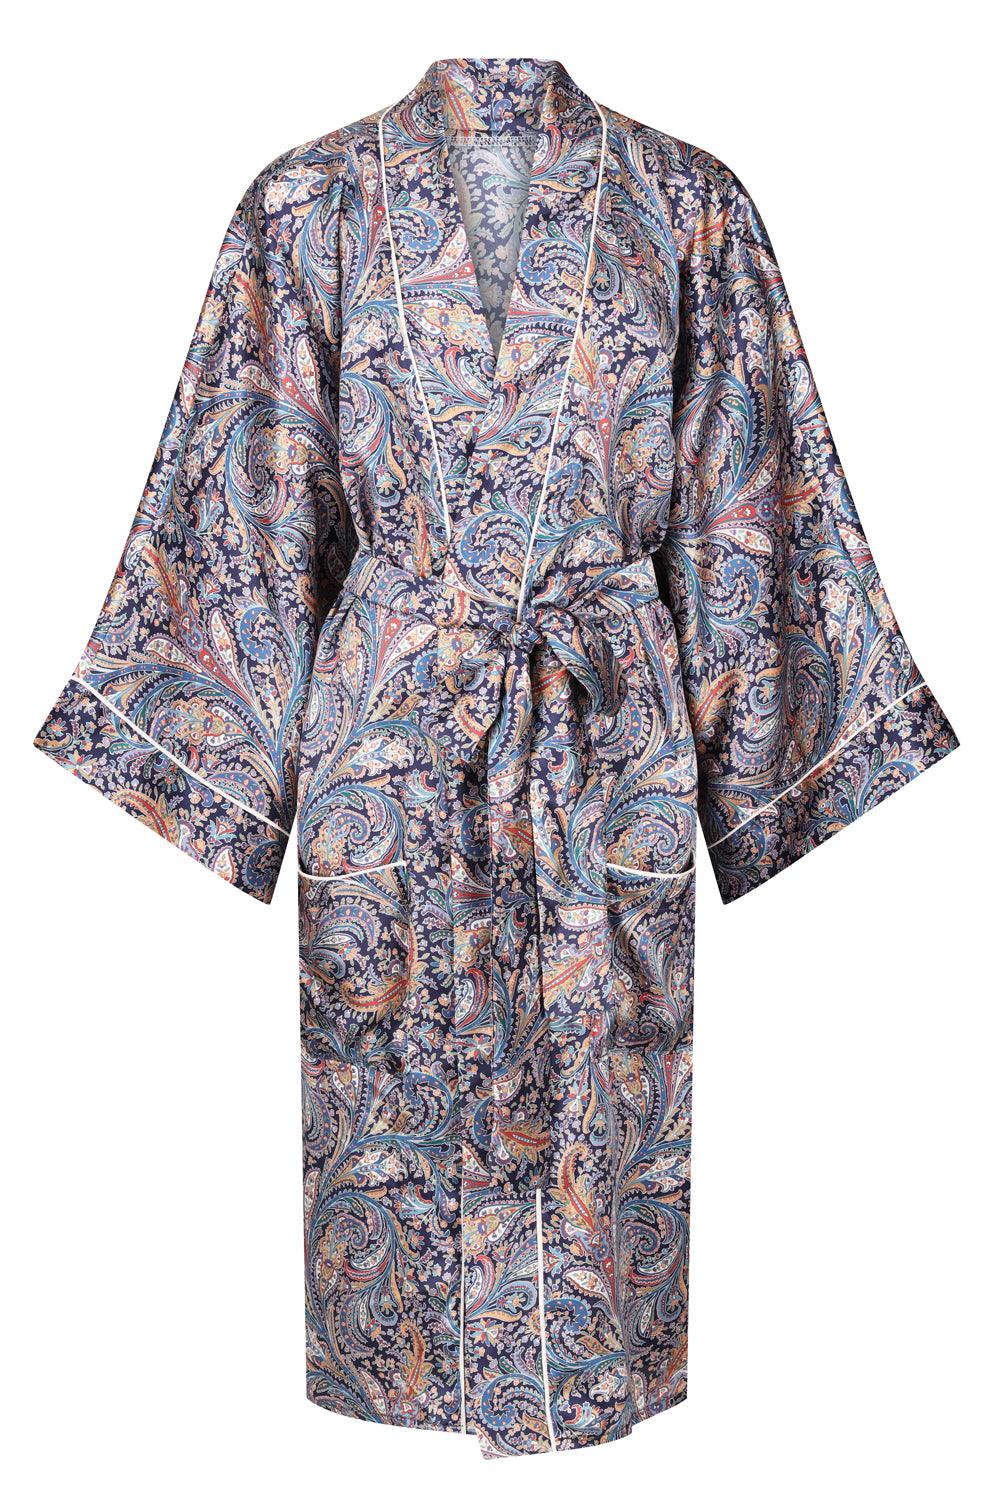 Women's Silk Kimono made with Liberty Fabric GREAT MISSENDEN - Coco & Wolf